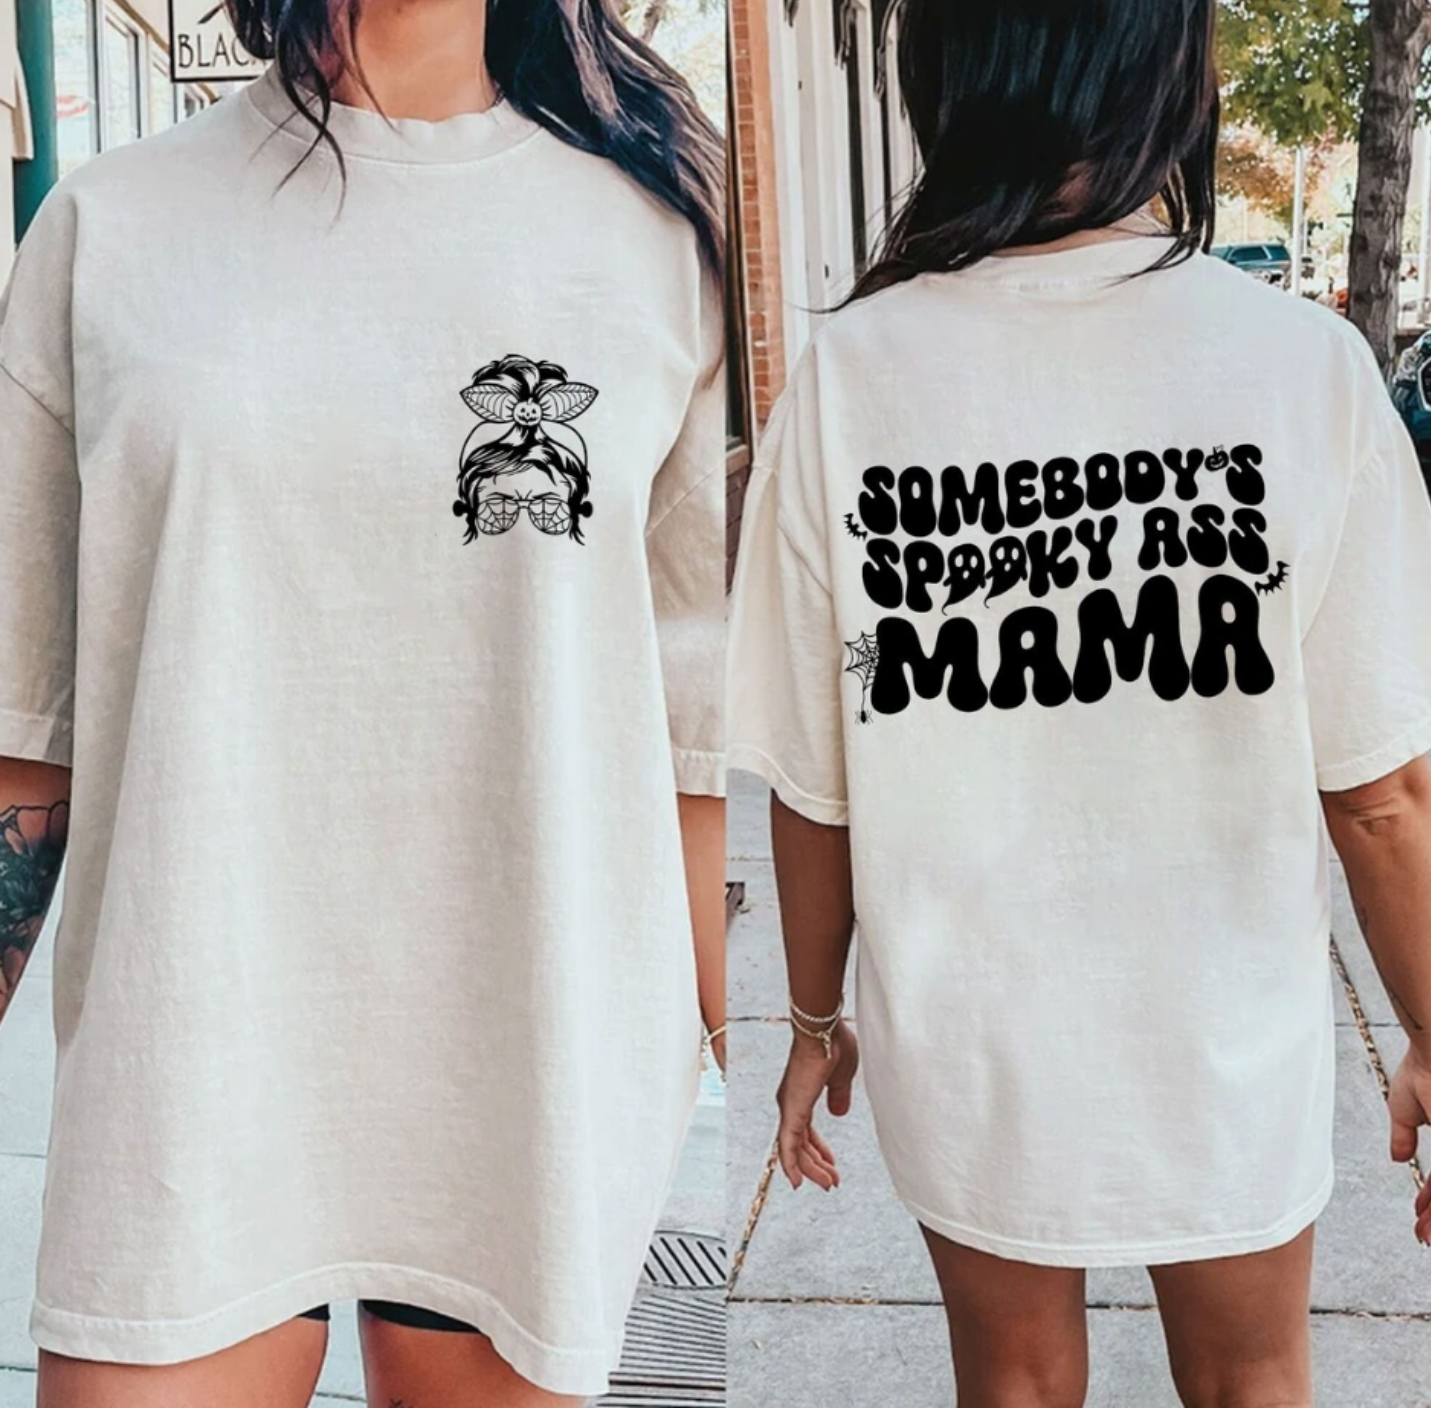 Somebody's Spooky ass MAMA Halloween SINGLE COLOR BLACK  size ADULT FRONT  BACK  DTF TRANSFERPRINT TO ORDER